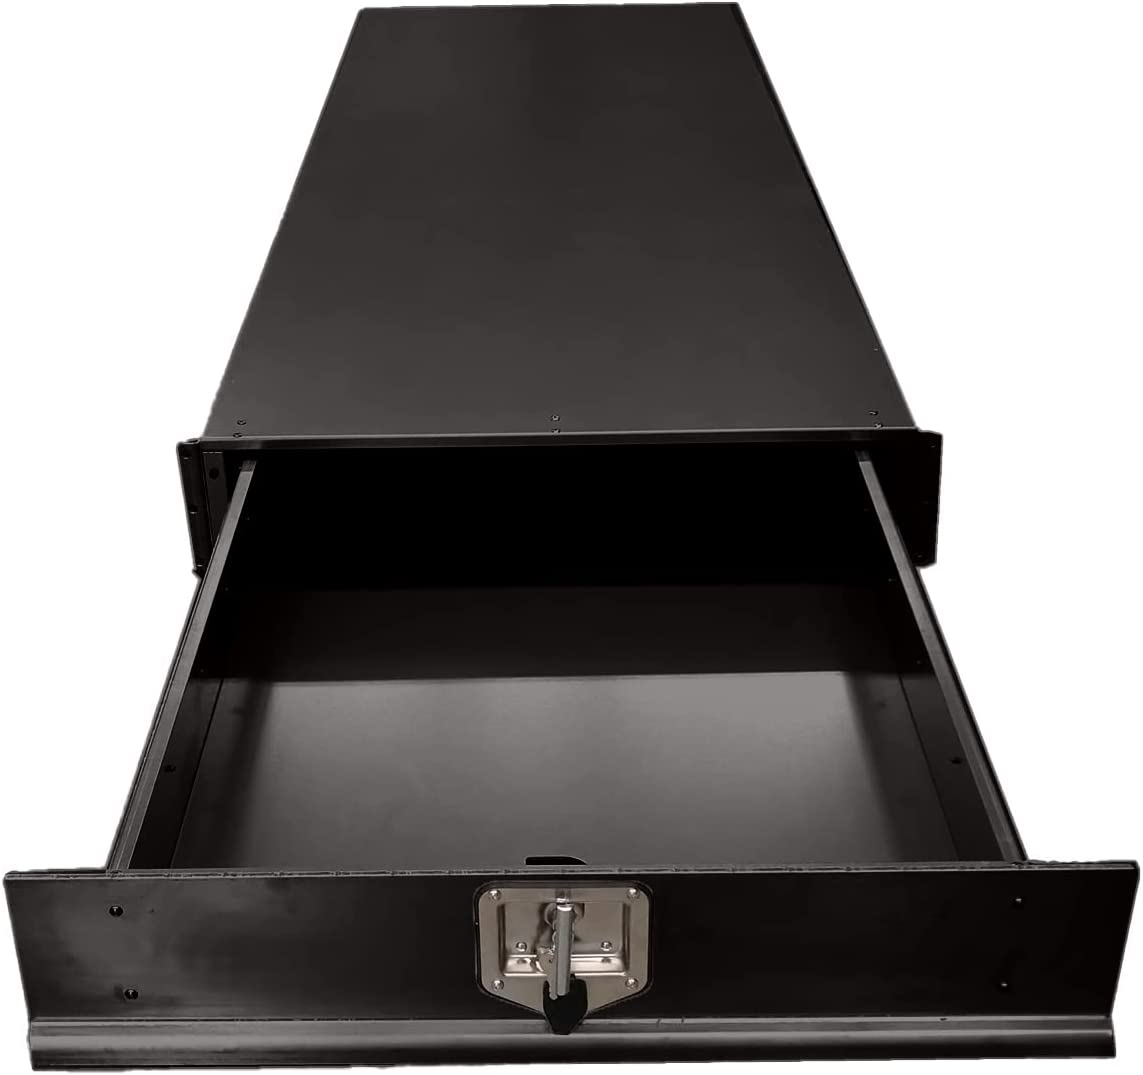 Under Tray Body Tool Box Trundle Drawer 1500 Long UTE Truck ToolBox Black - SILBERSHELL